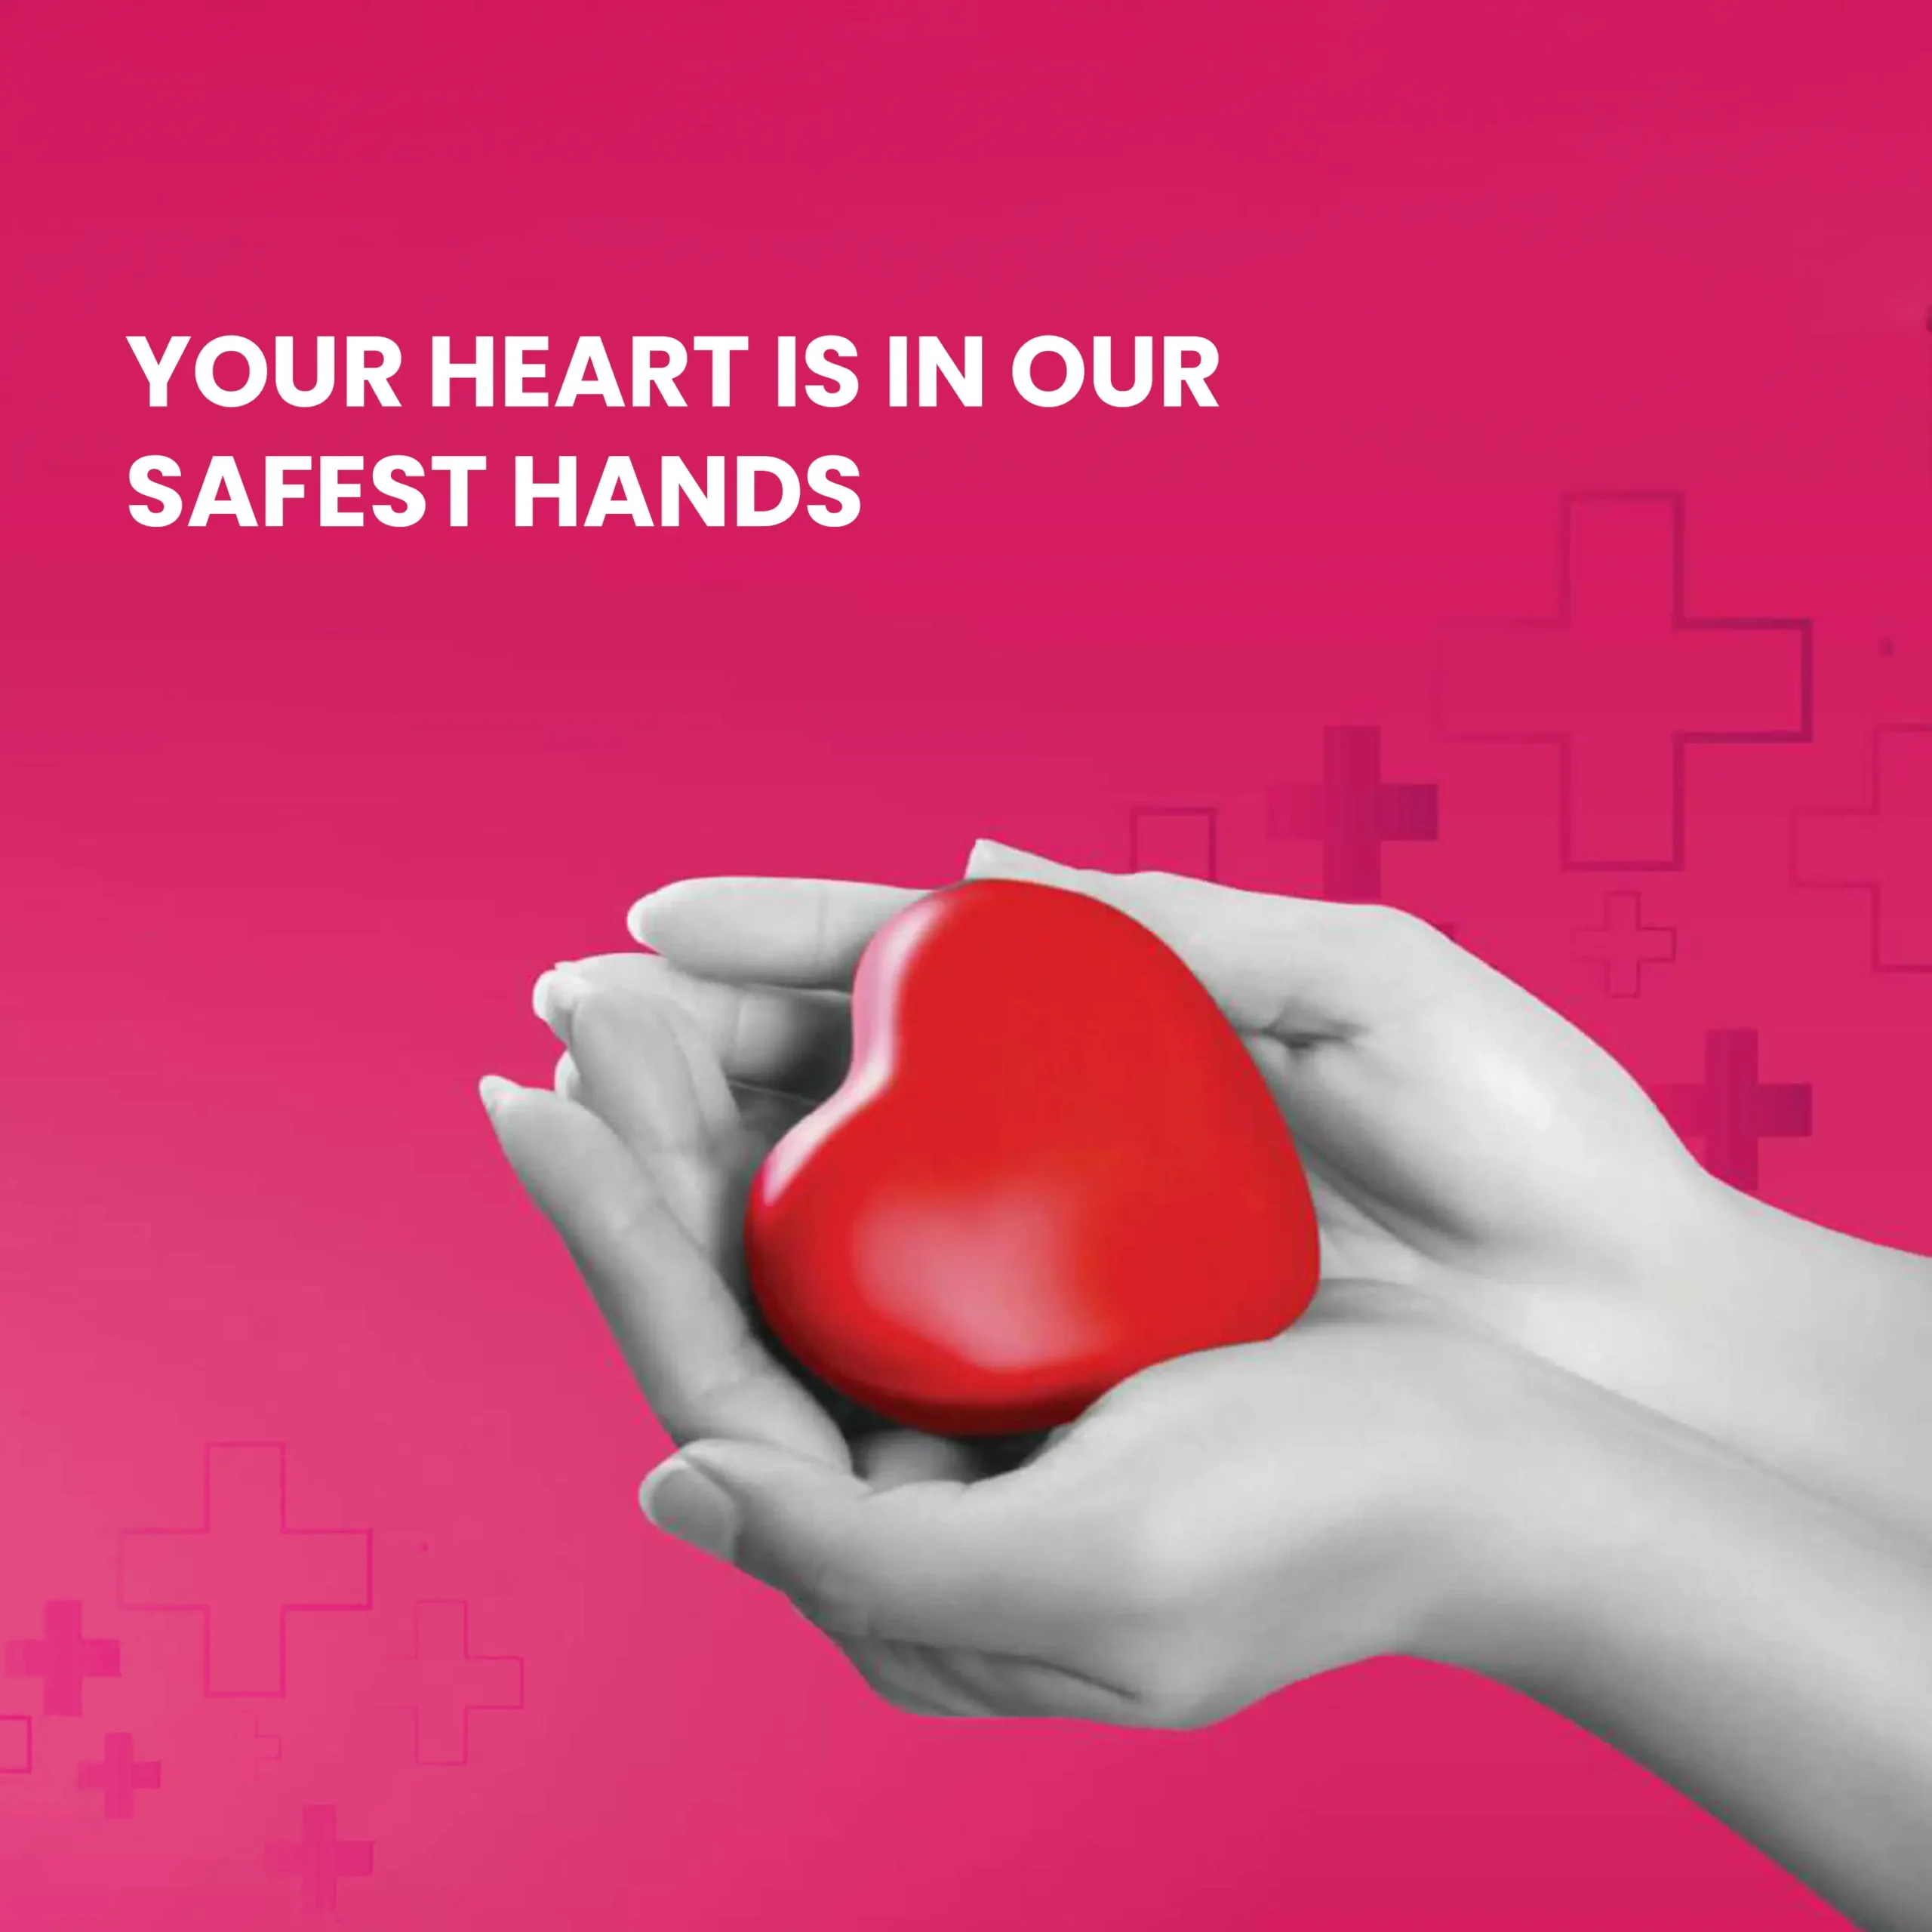 Image depicts Altius hospitals cardiac department that takes care of heart ailments